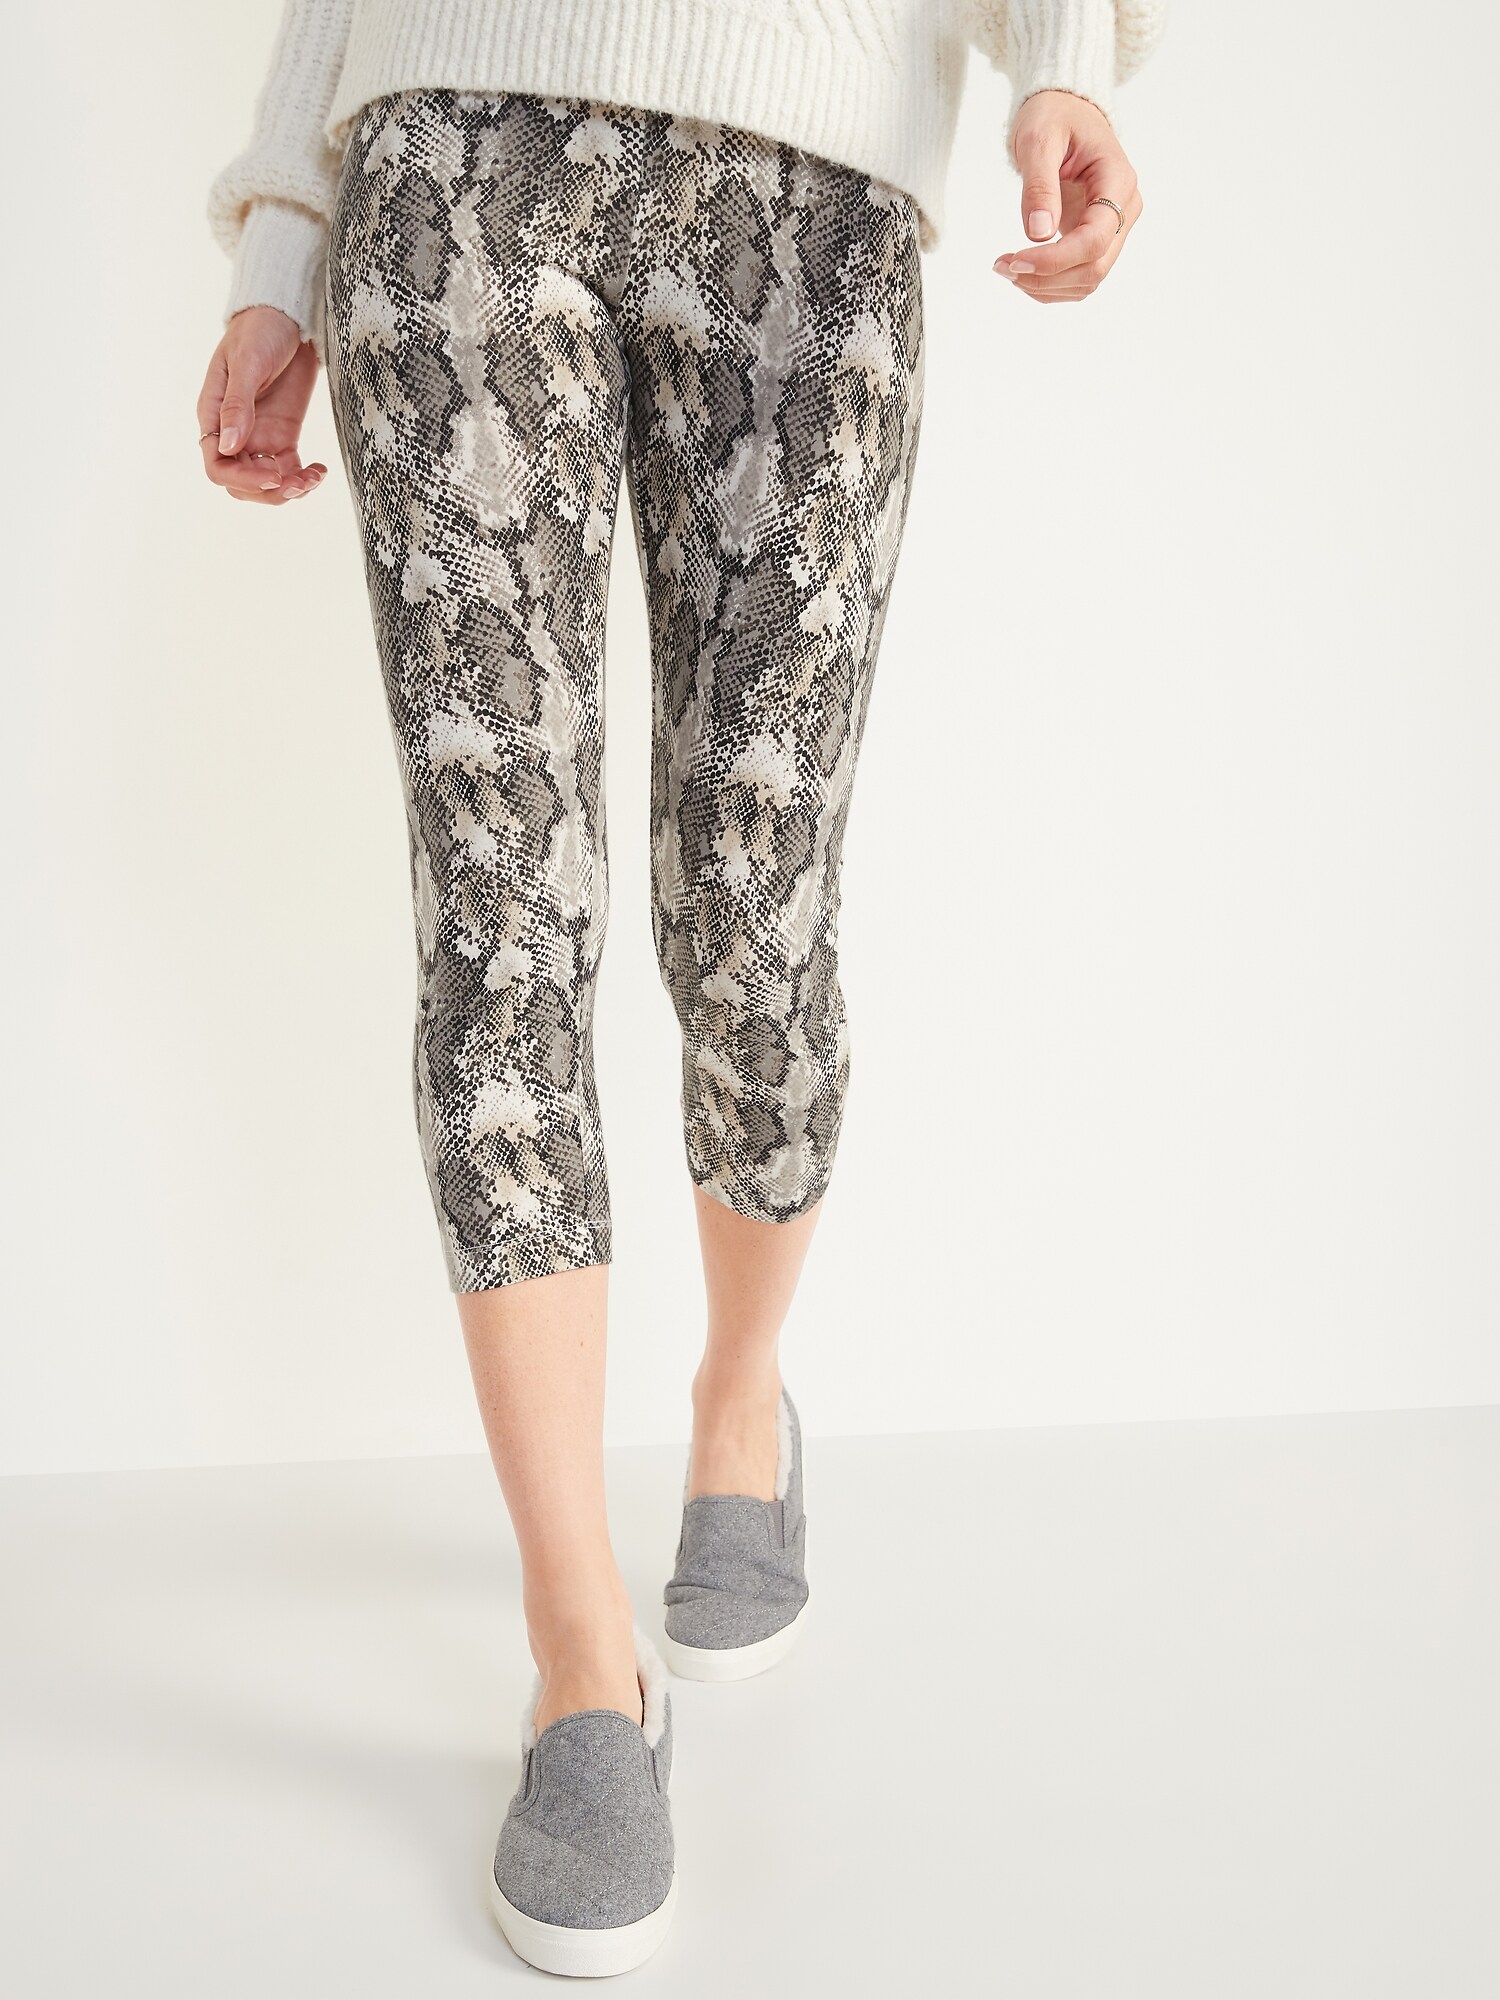 High-Waisted Printed Cropped Leggings For Women, Old Navy